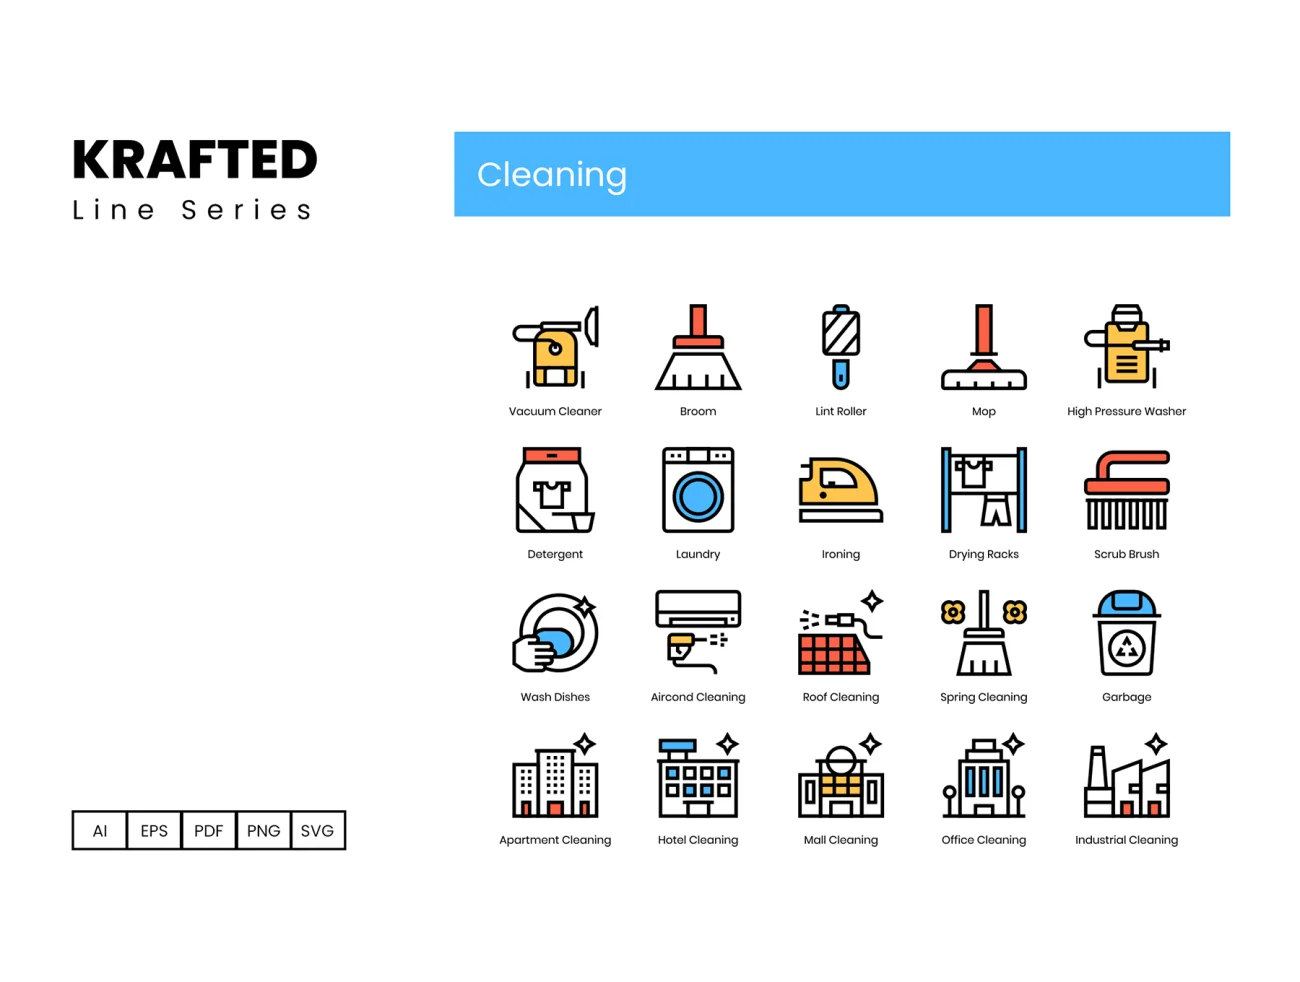 60 Cleaning Icons Krafted Line Series 60个清洁图标牛皮纸生产线系列-3D/图标-到位啦UI